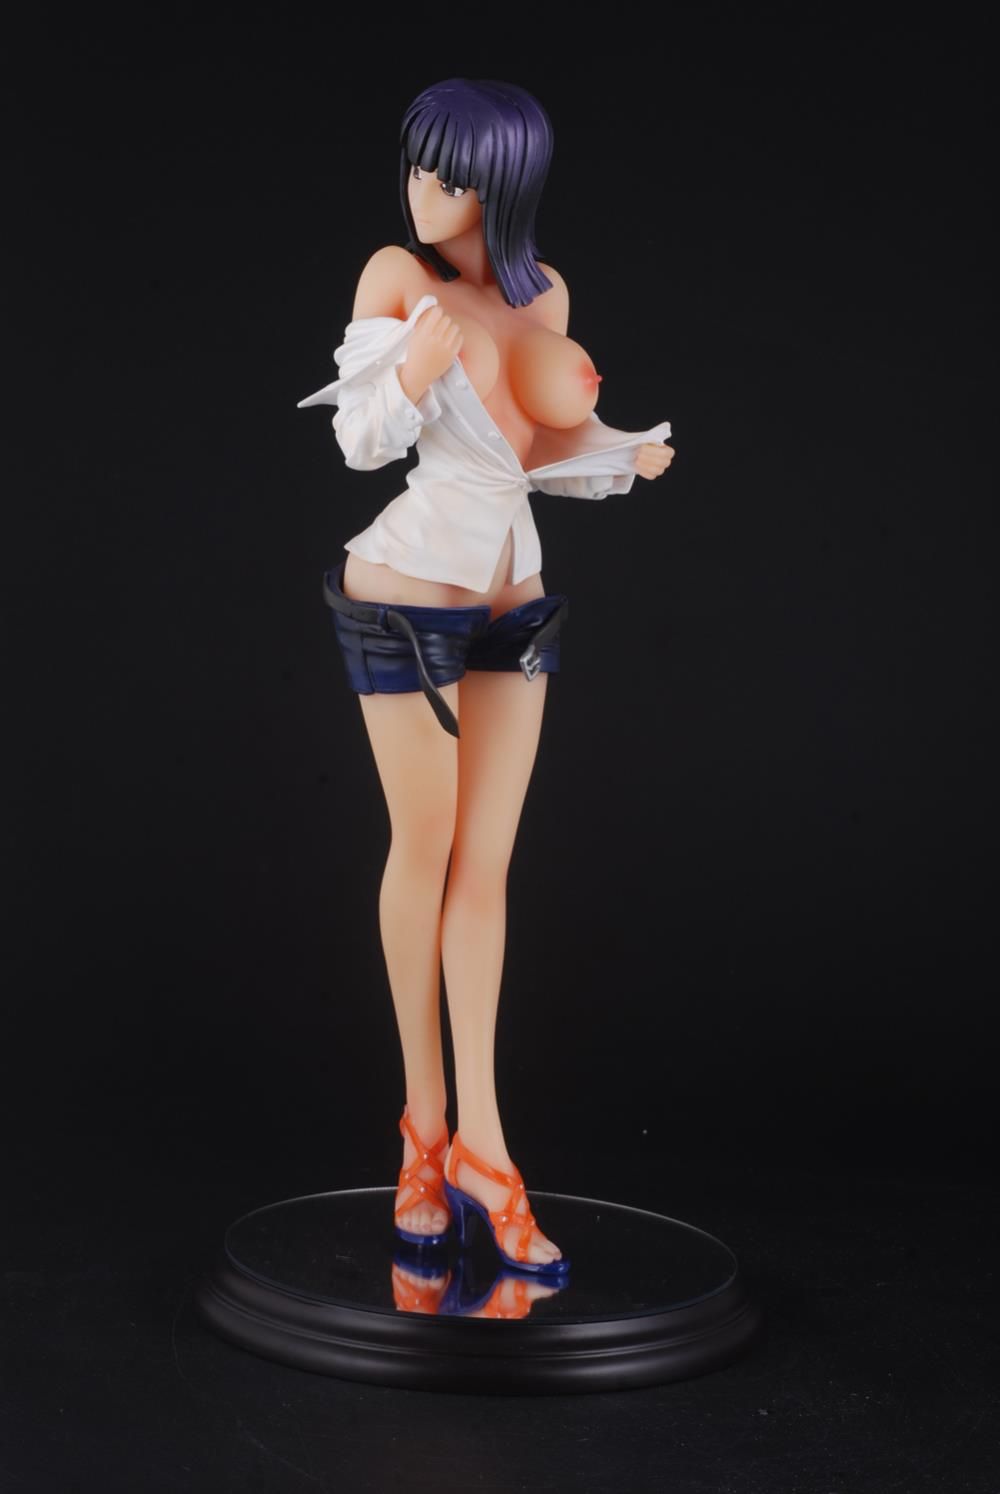 Action Sex Naked - One Piece Nico Robin Sexy Girls Action Figure Anime Sex Nude Figures Scale  Pre Painted Resin Model Toy High Quality From Full DressSexiezPix Web Porn